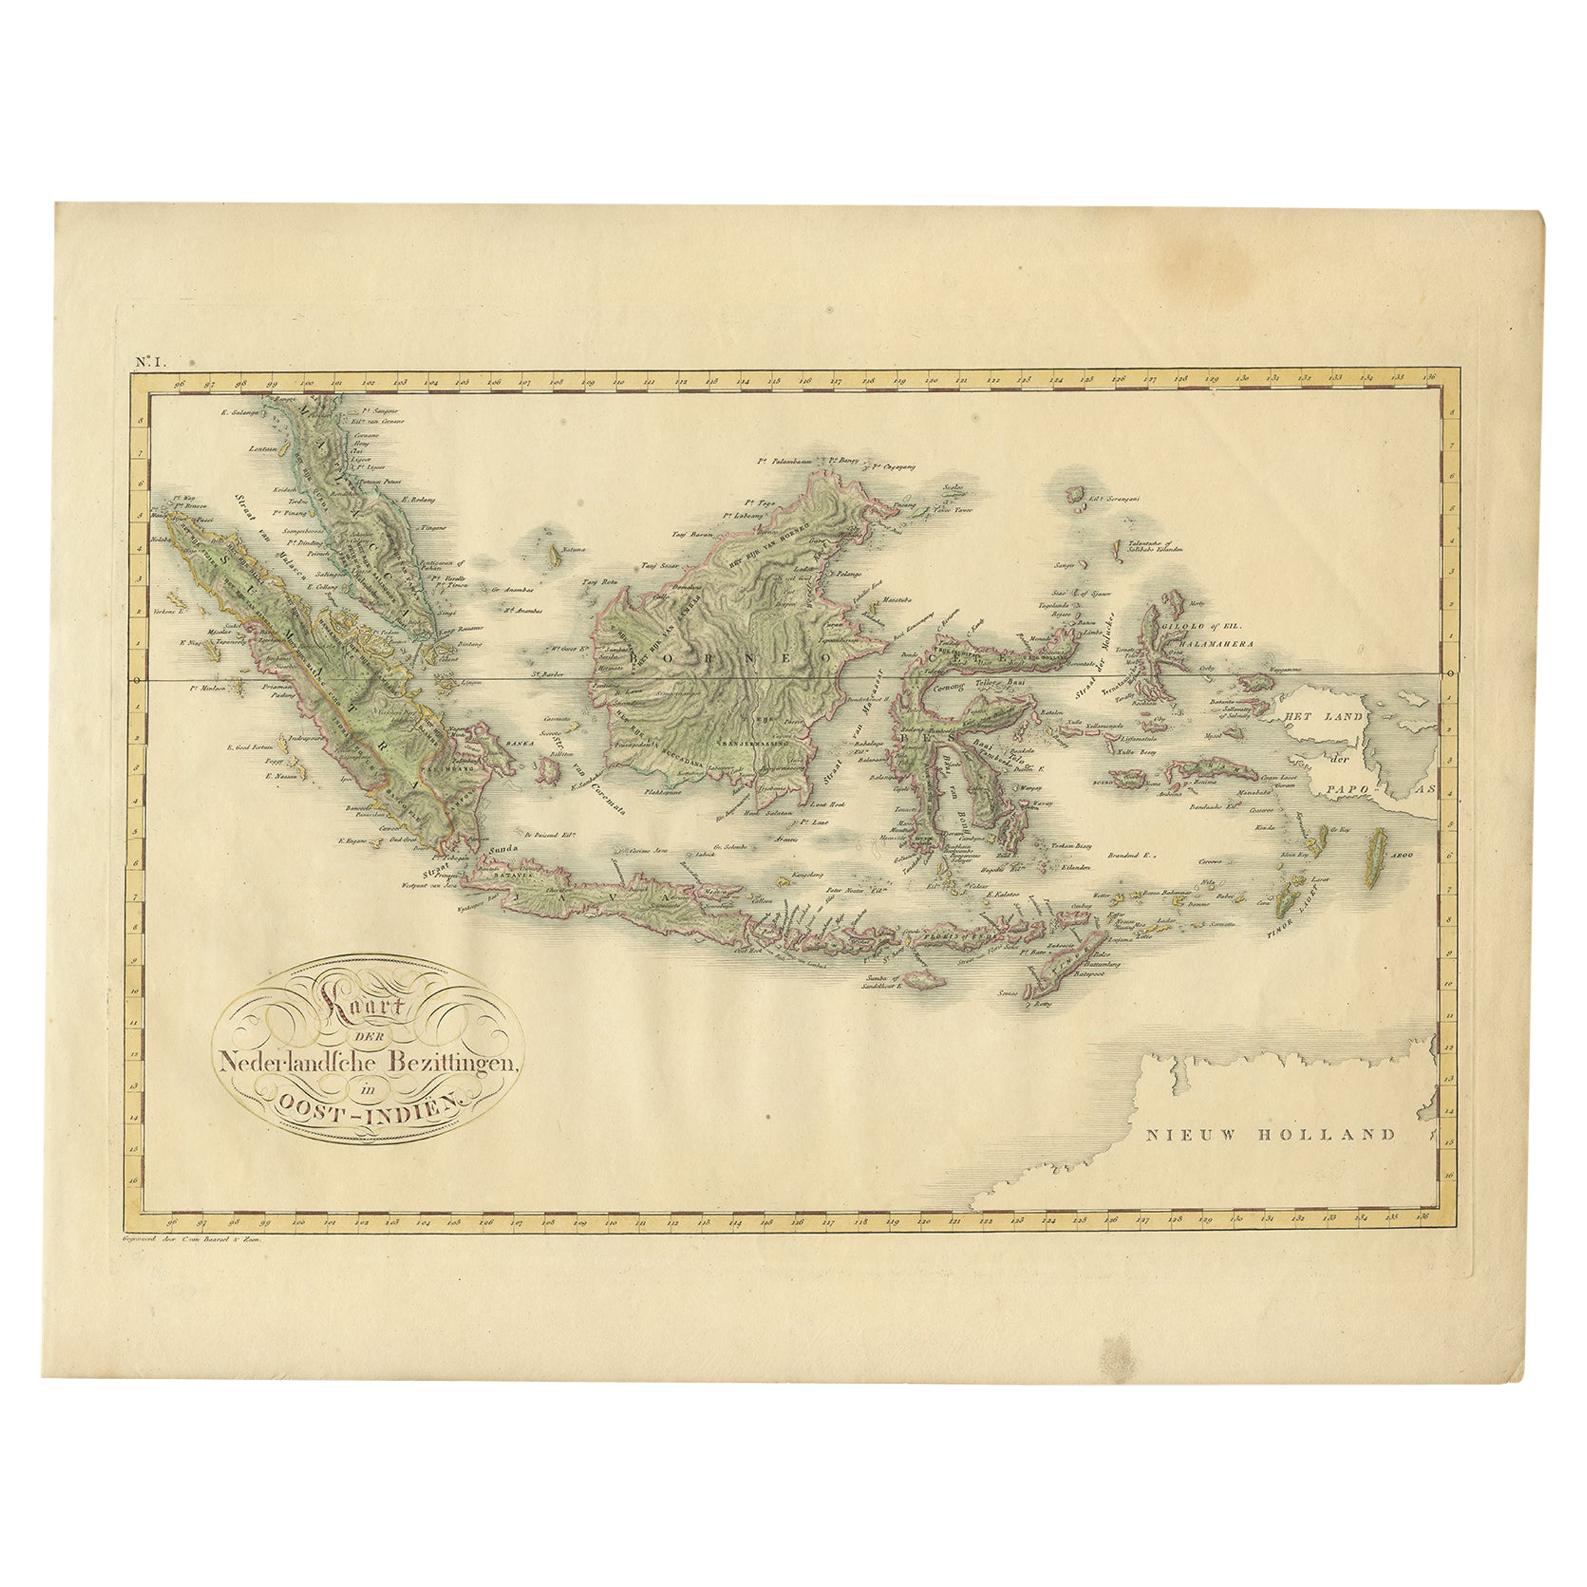 Antique Map of the Dutch East Indies by Van den Bosch '1818' For Sale